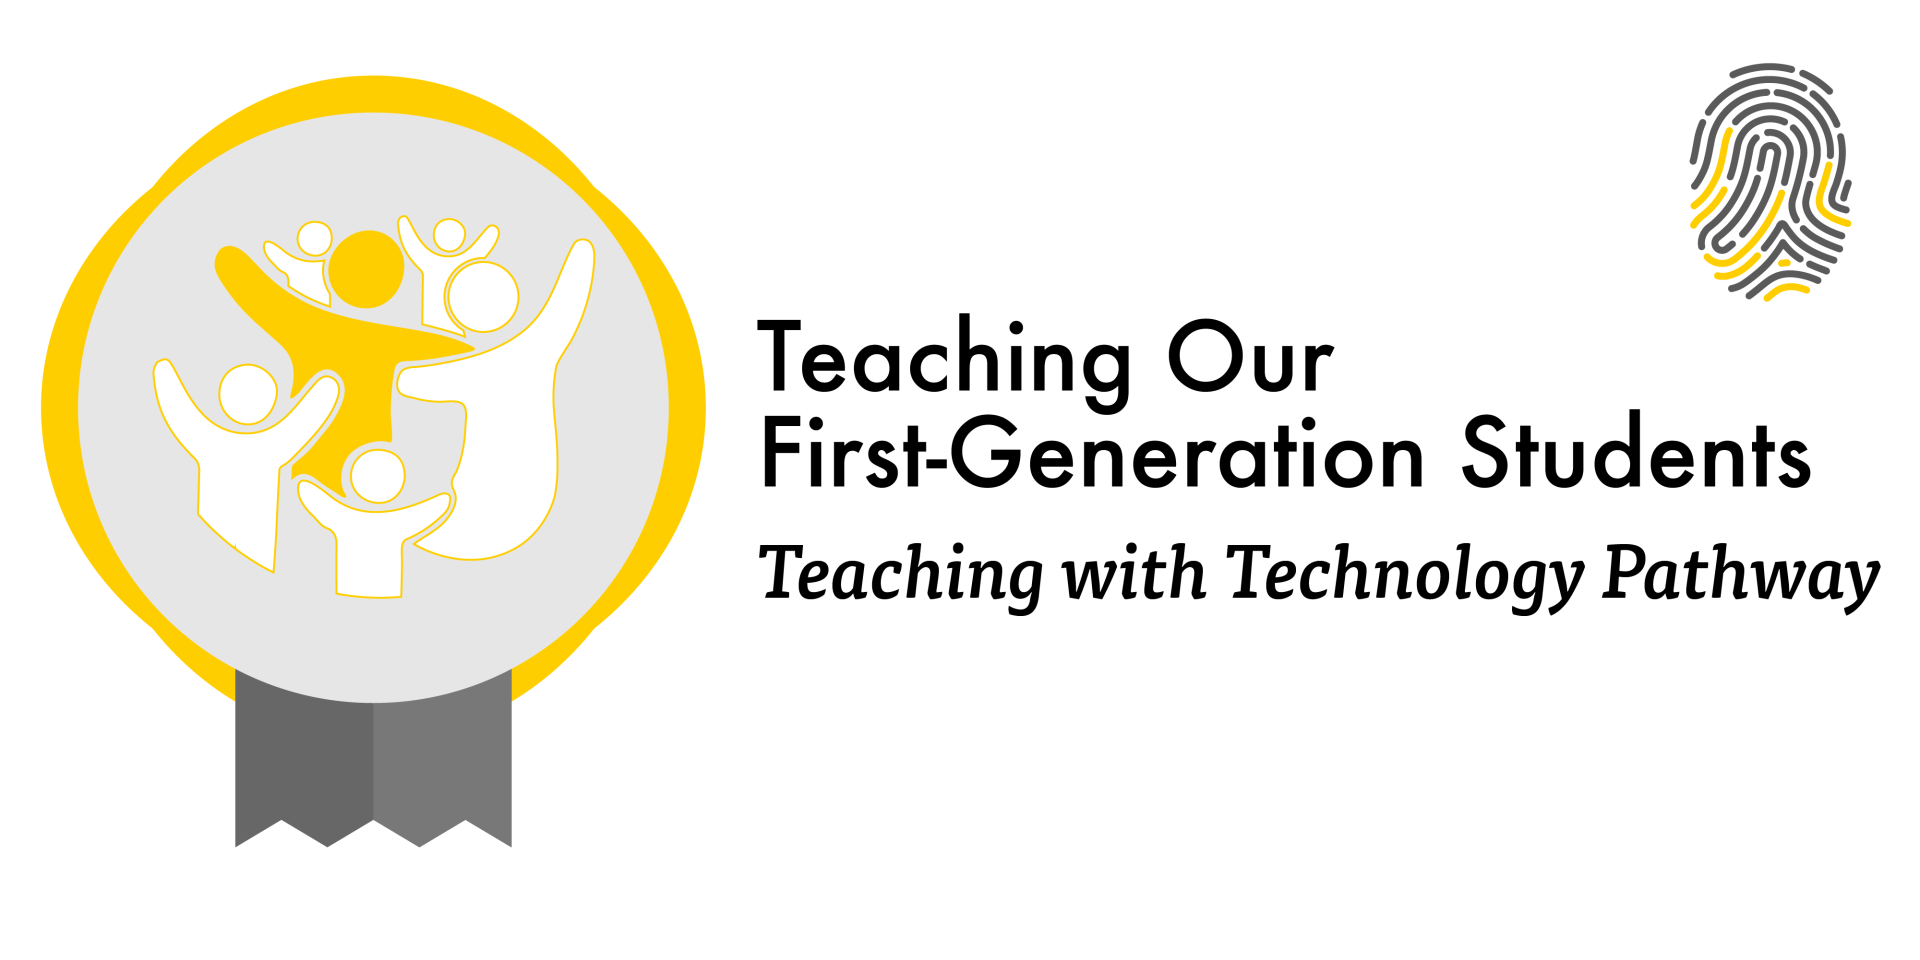 Teaching Our First-Generation Students, Teaching with Technology Pathway